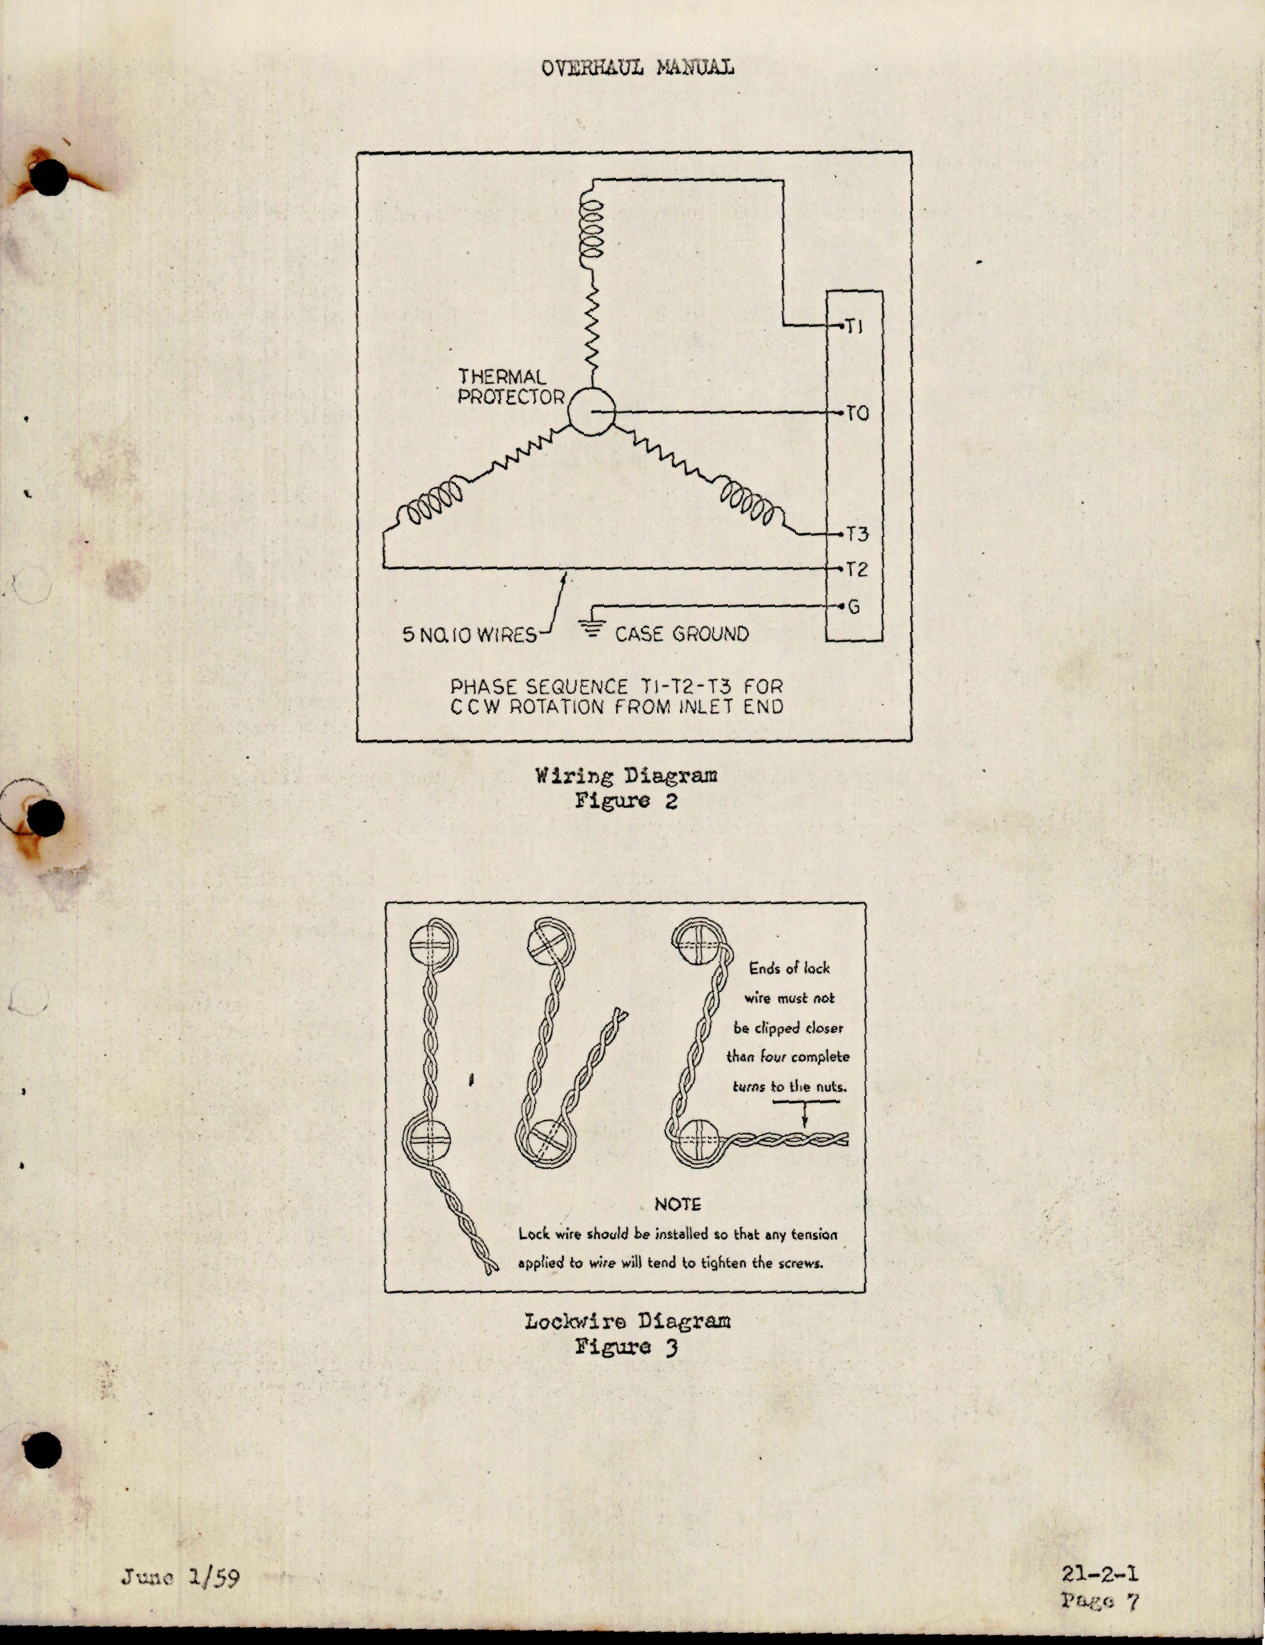 Sample page 7 from AirCorps Library document: Overhaul Manual for Axivane Fan Assembly - Joy Part X702-256C - Douglas Part 7615765E